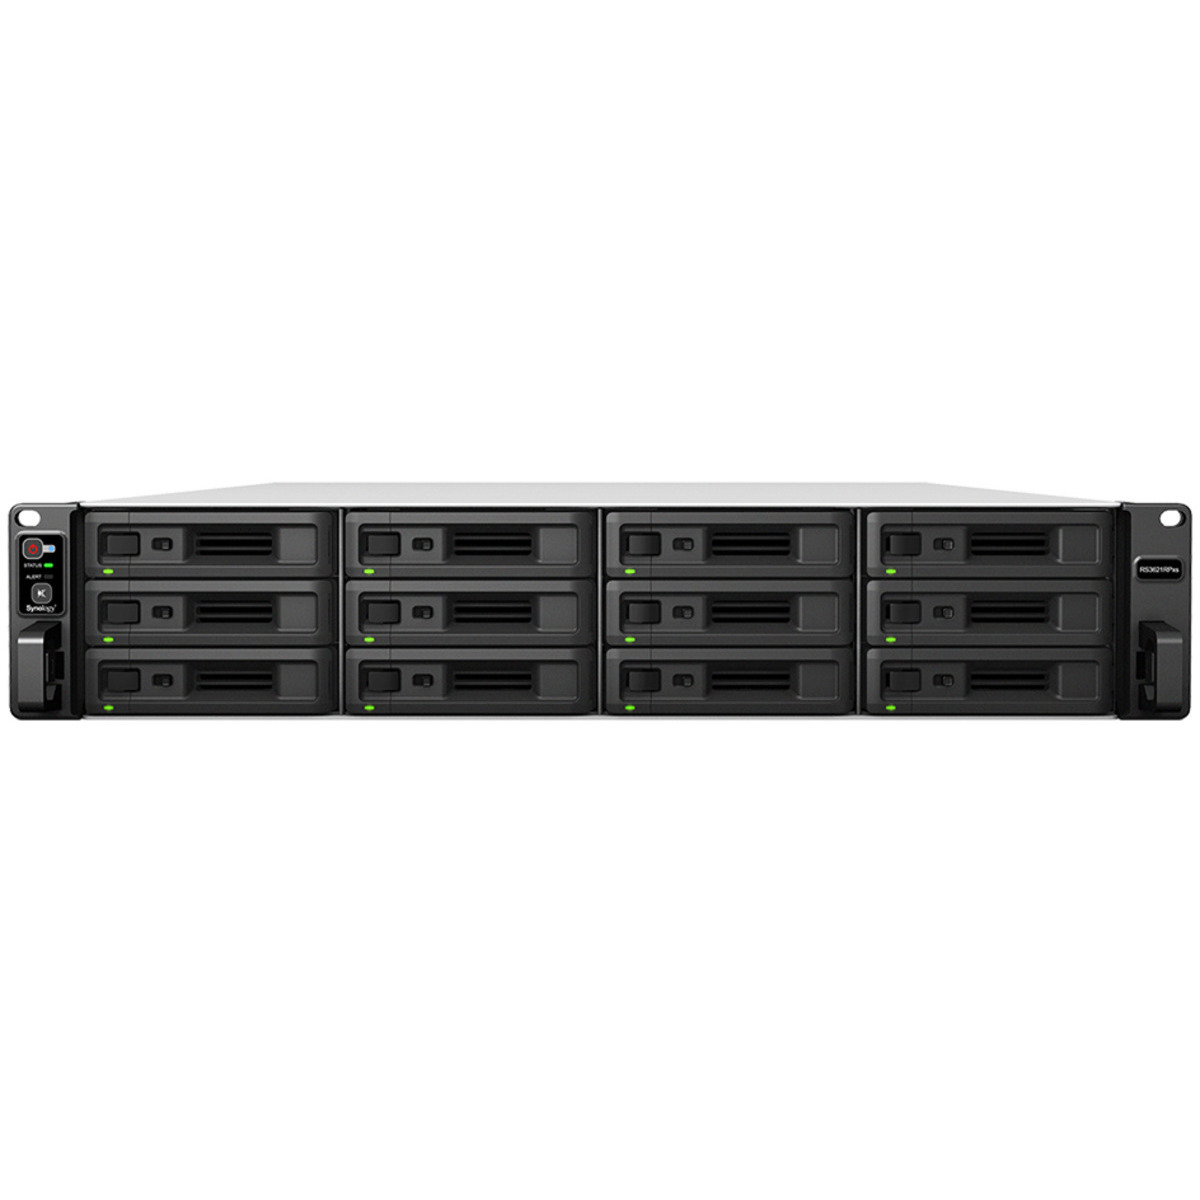 Synology RackStation RS3621RPxs 126tb 12-Bay RackMount Large Business / Enterprise NAS - Network Attached Storage Device 7x18tb Western Digital Gold WD181KRYZ 3.5 7200rpm SATA 6Gb/s HDD ENTERPRISE Class Drives Installed - Burn-In Tested RackStation RS3621RPxs